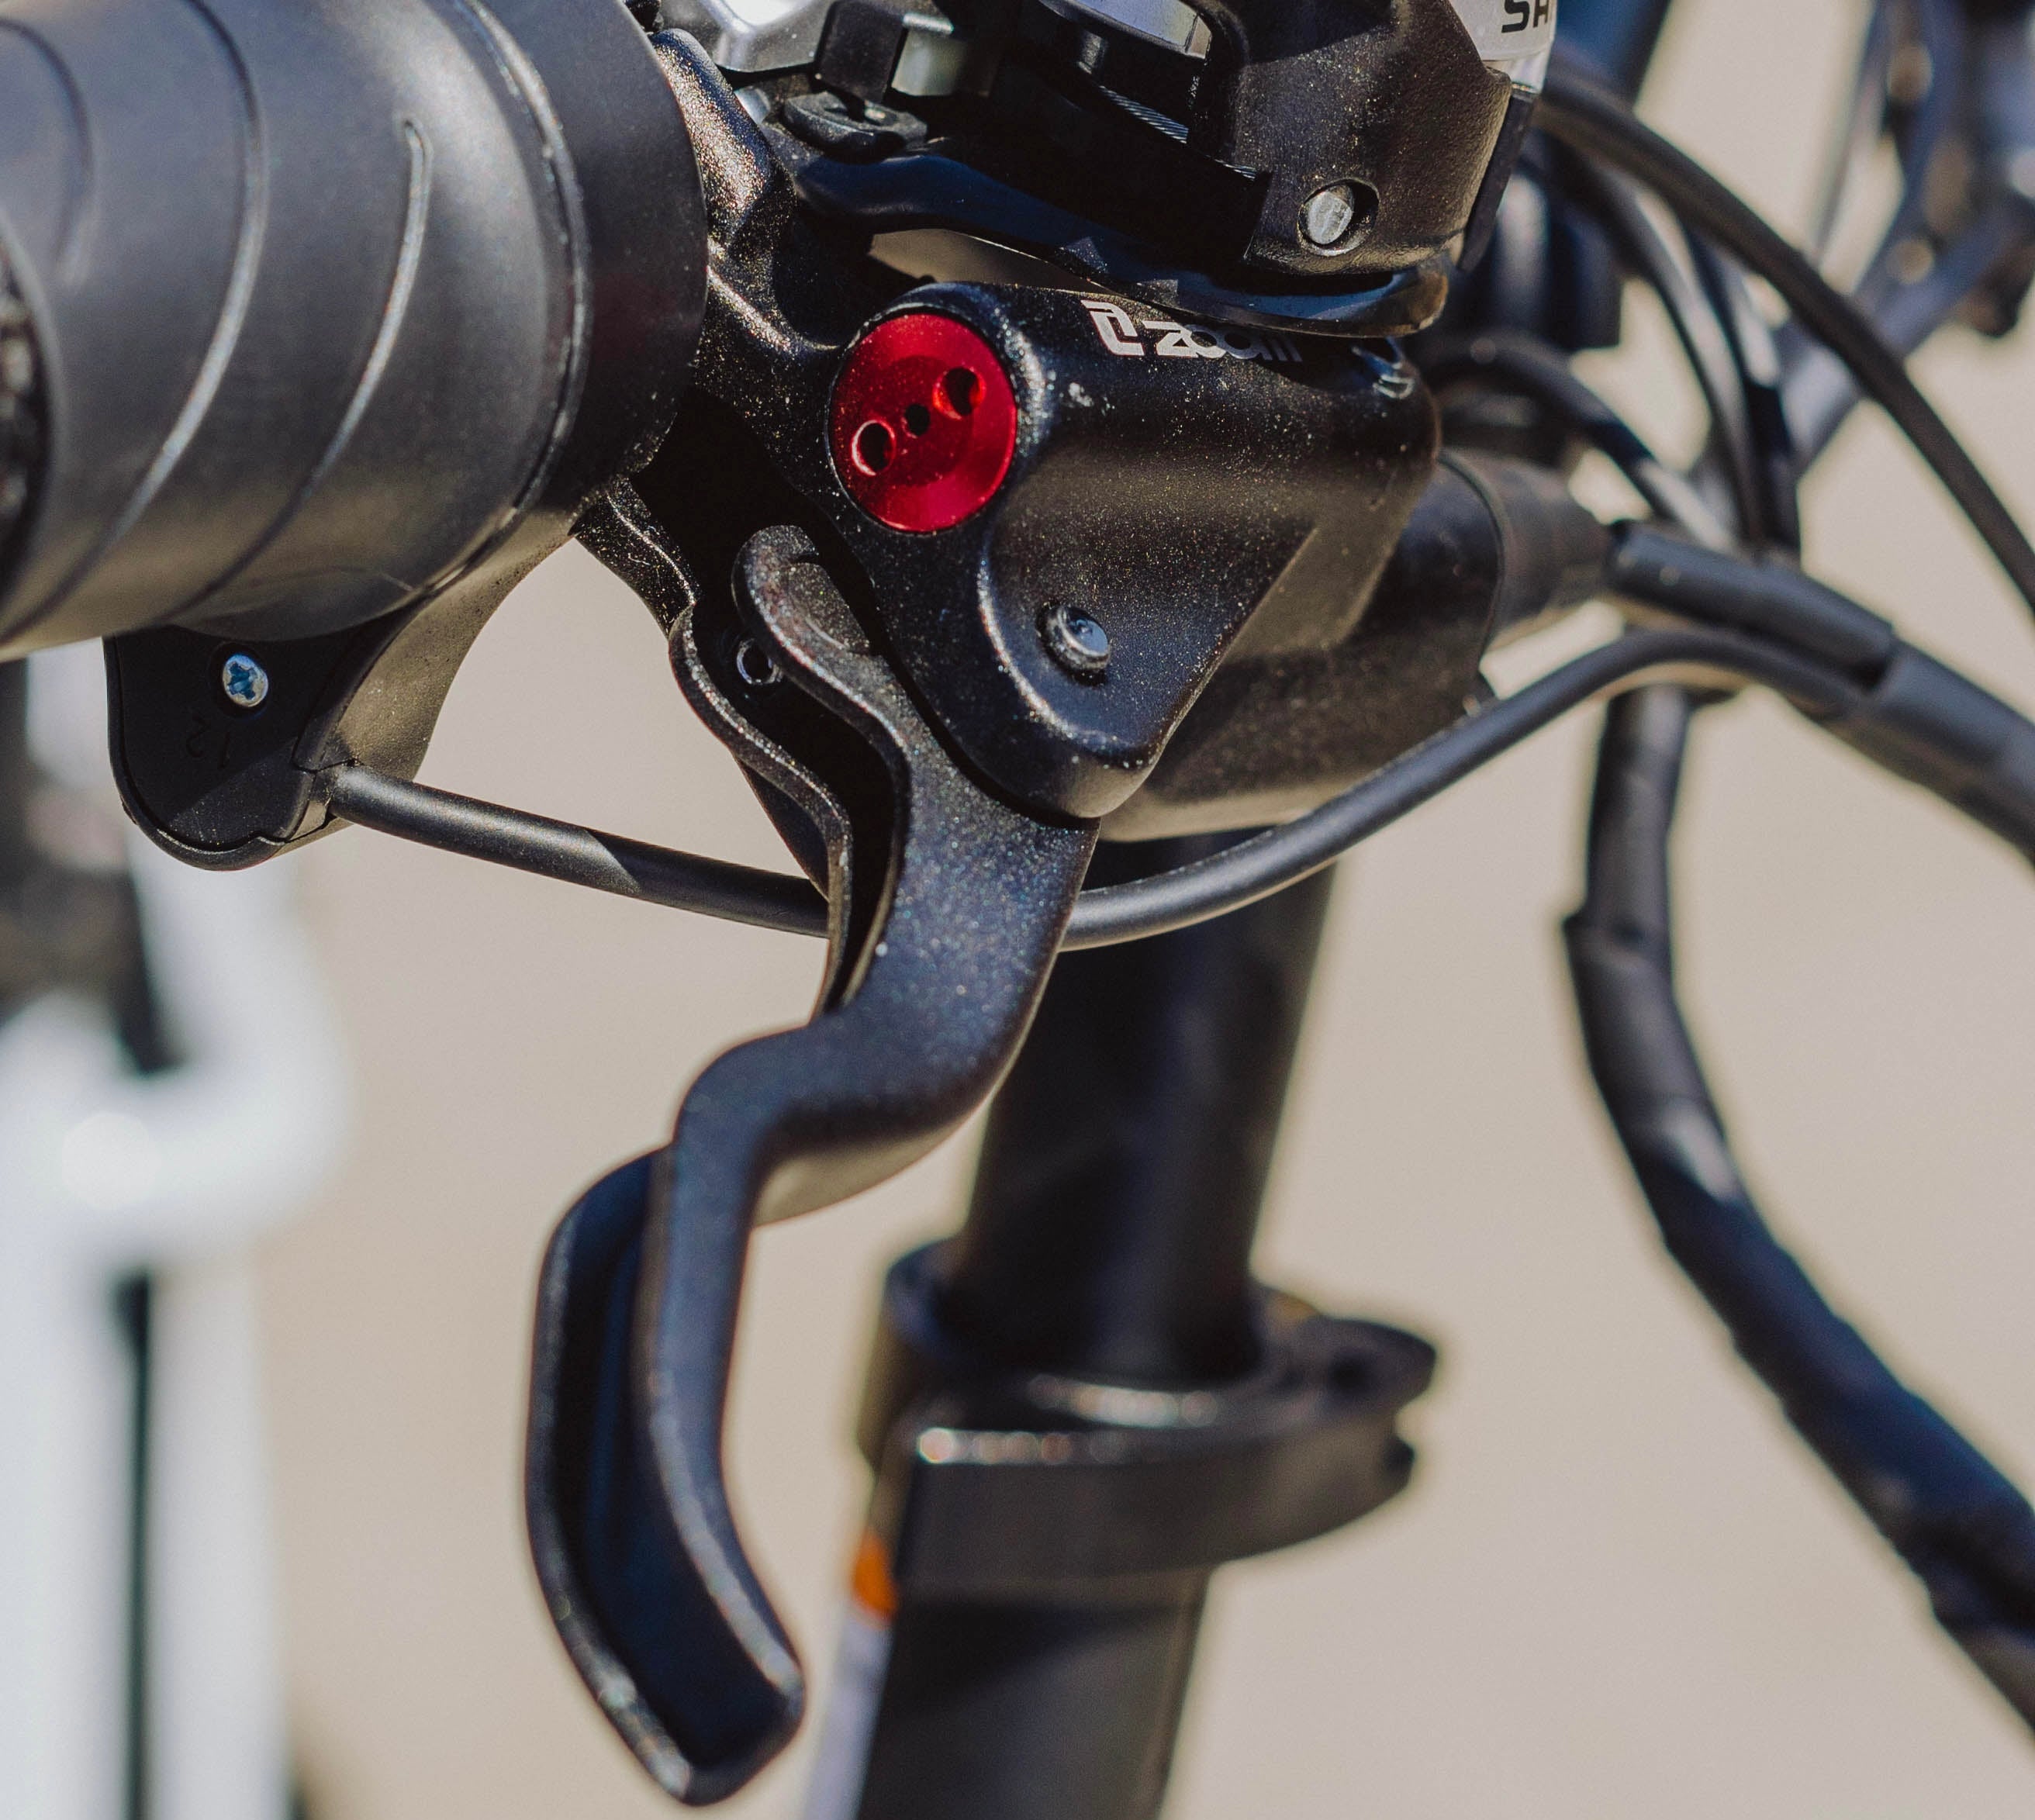 Mechanical vs hydraulic disc brakes – which type is best for you